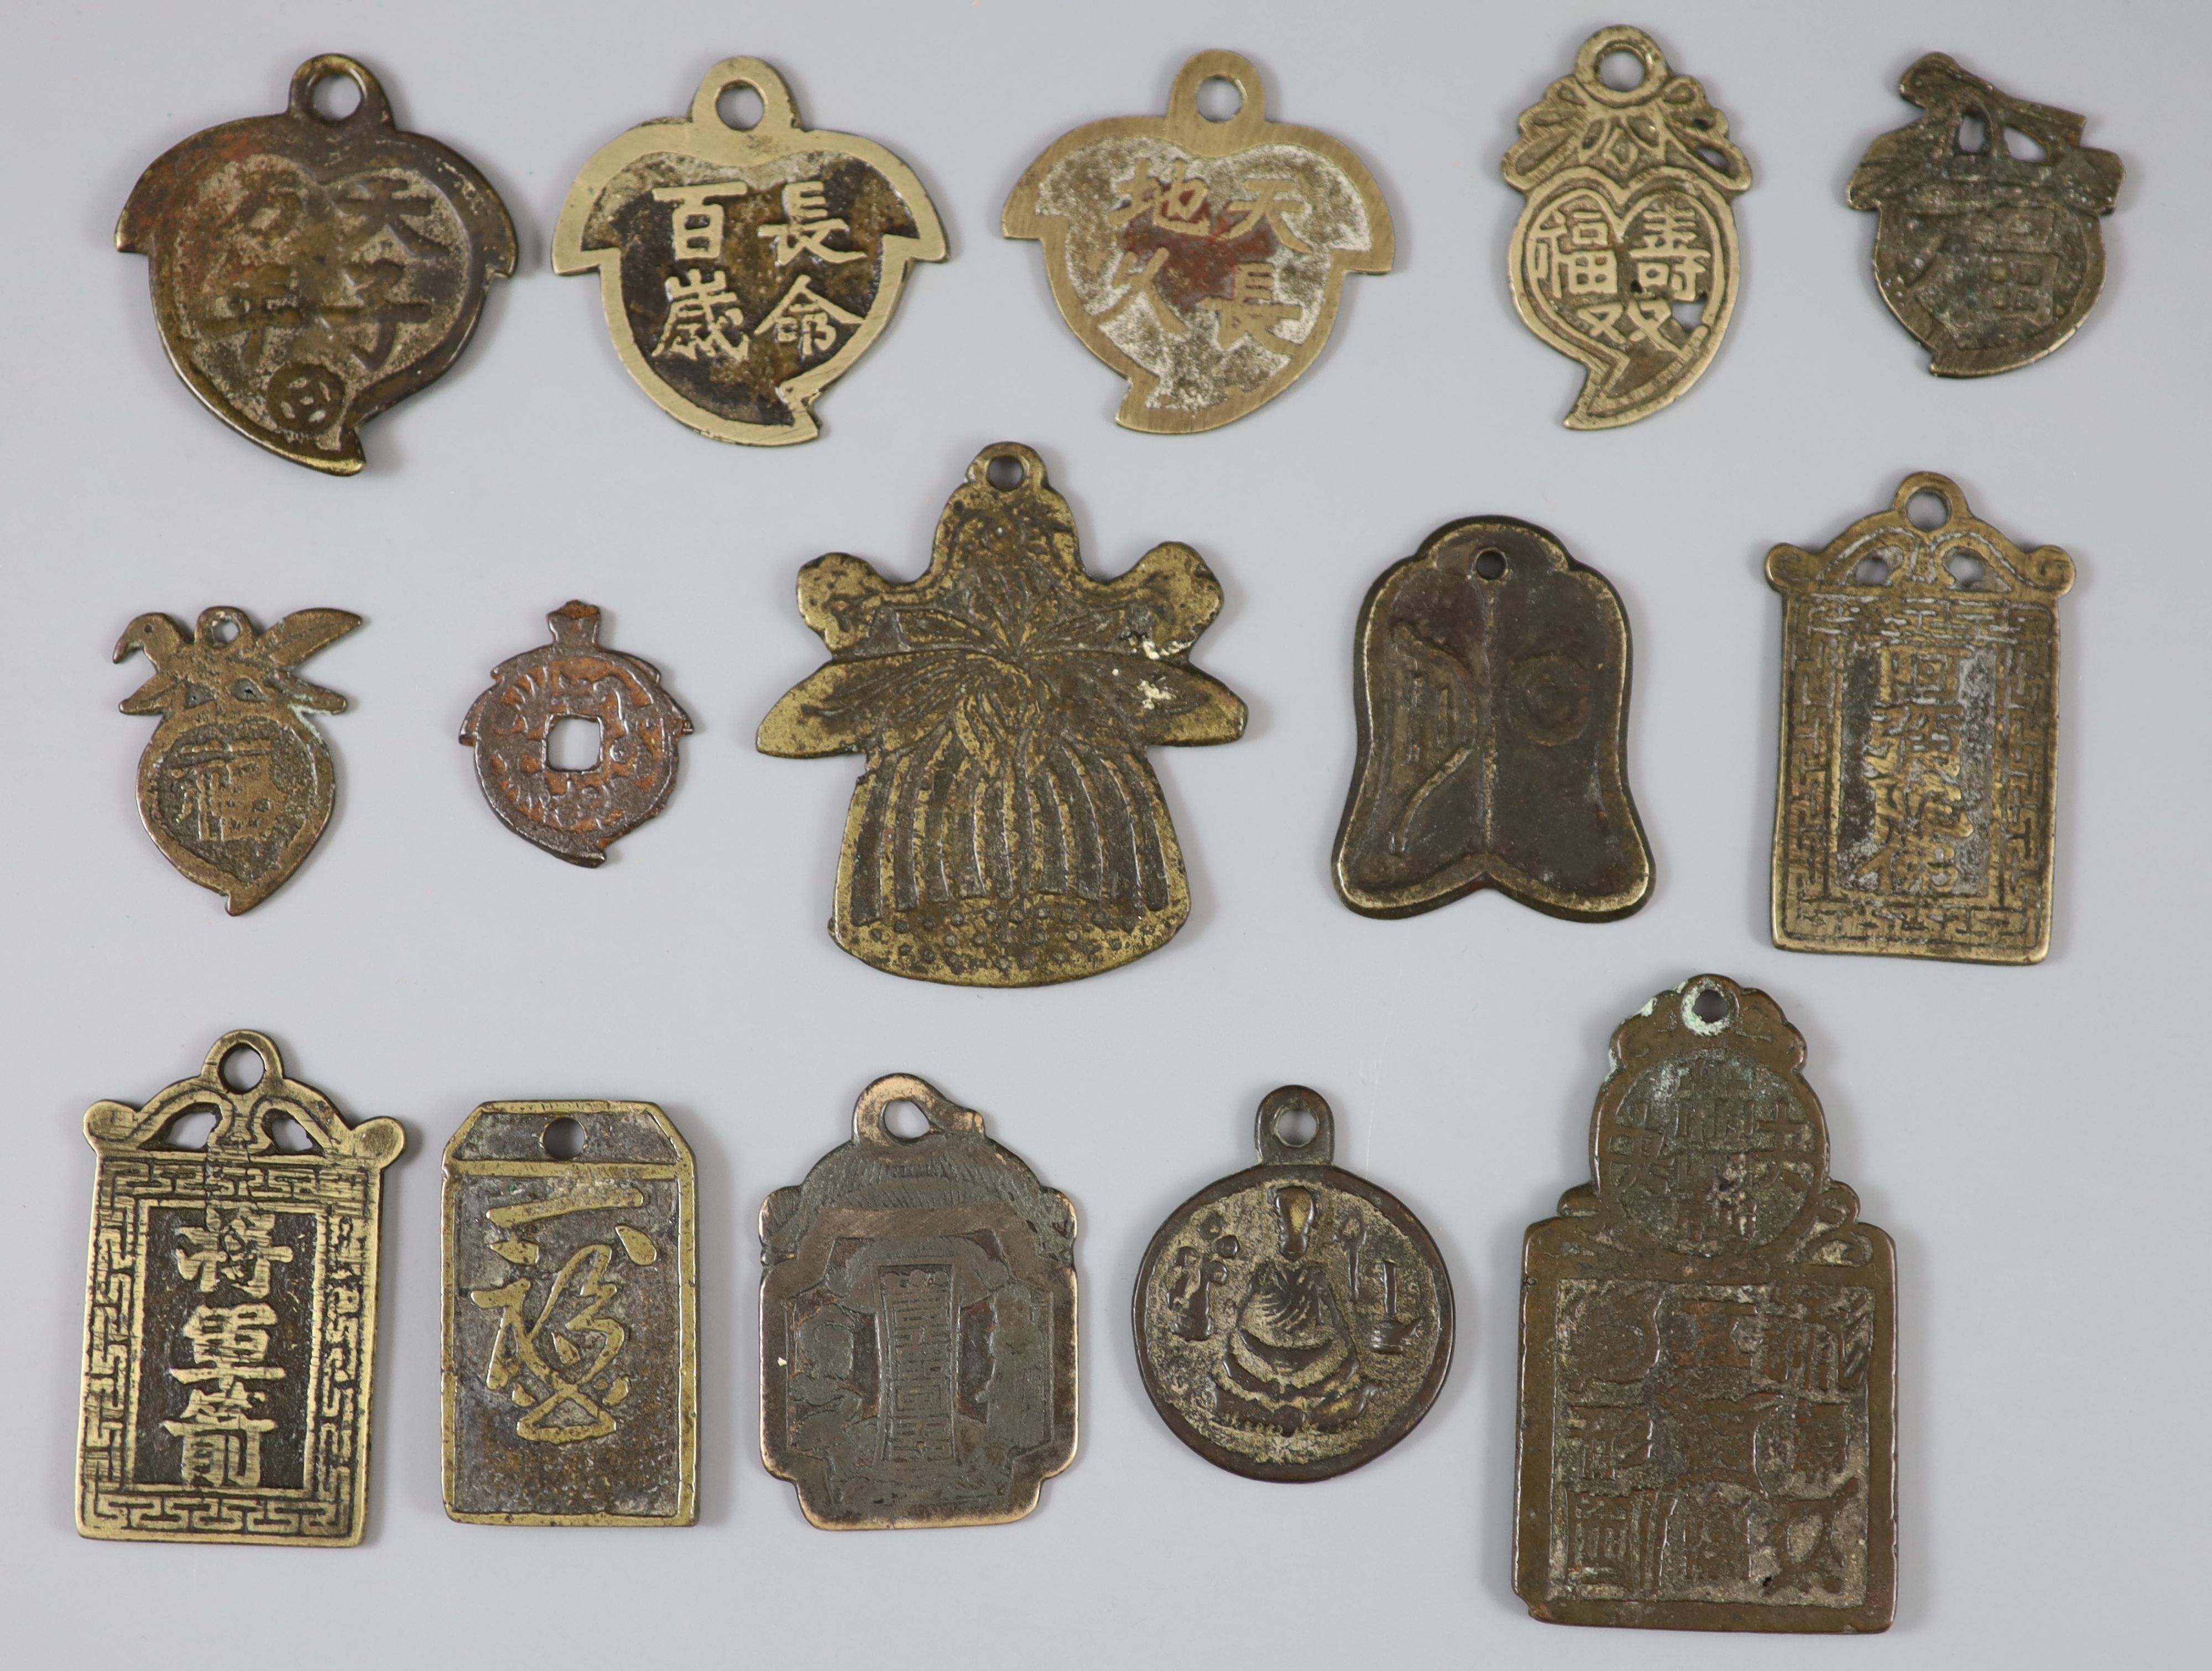 China, 15 bronze pendant charms or amulets, Qing dynasty,